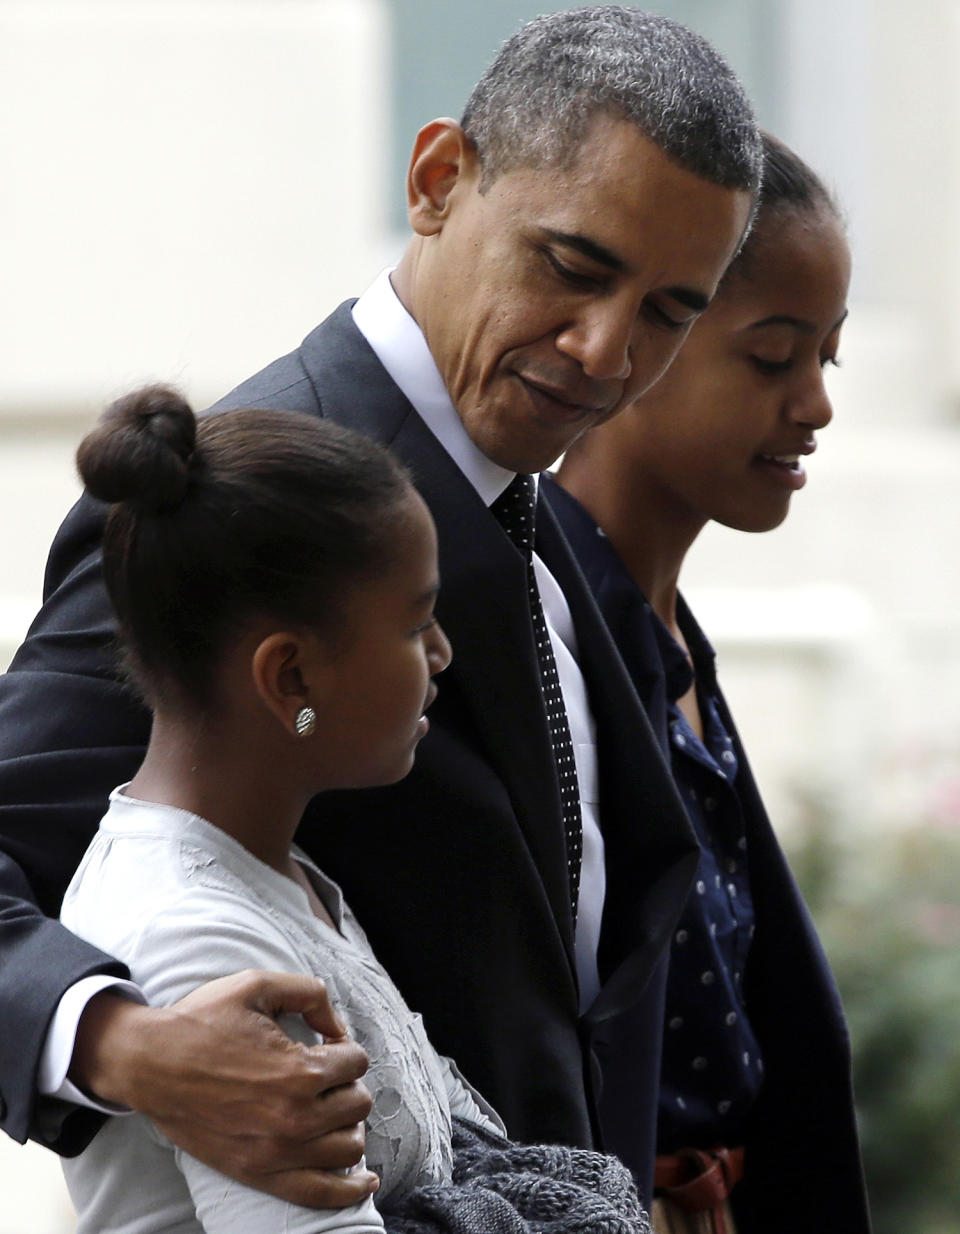 President Barack Obama walks with his daughters Sasha, foreground, and Malia as they leave St. John's Episcopal Church and return to the White House in Washington, on Sunday, Oct. 28, 2012. (AP Photo/Jacquelyn Martin)